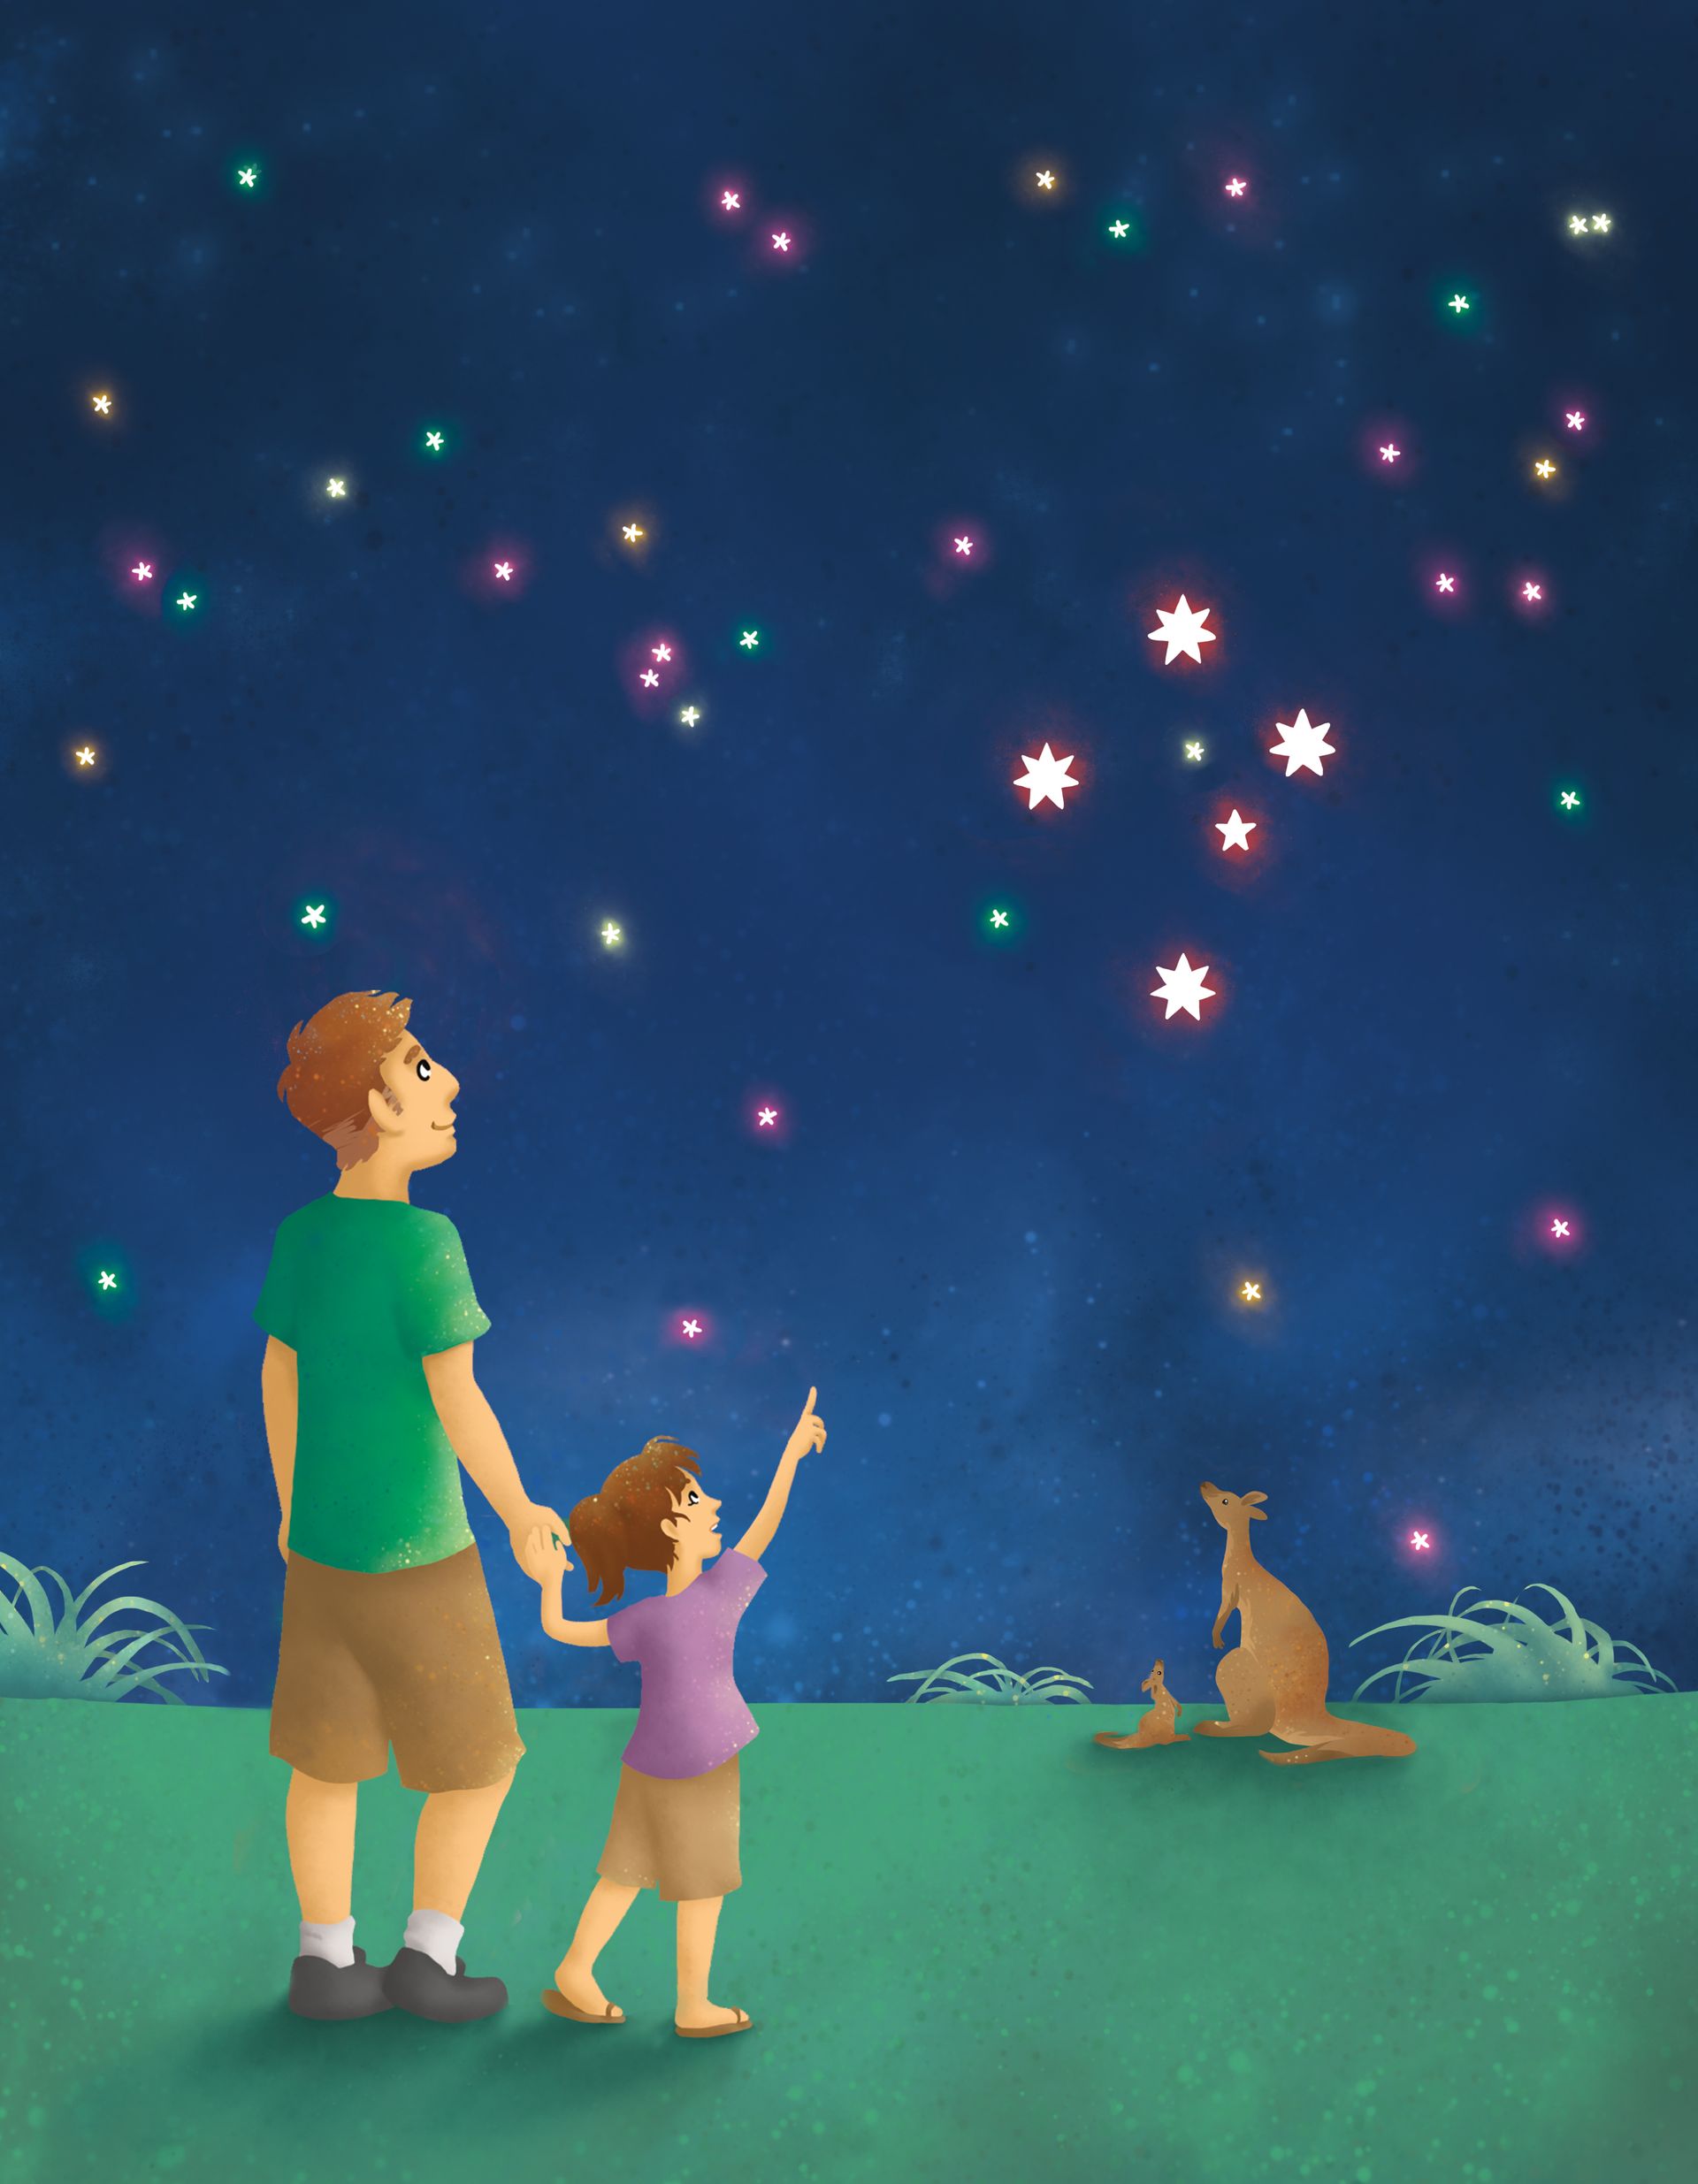 A father and daughter in Australia go outside at night and look at the stars.